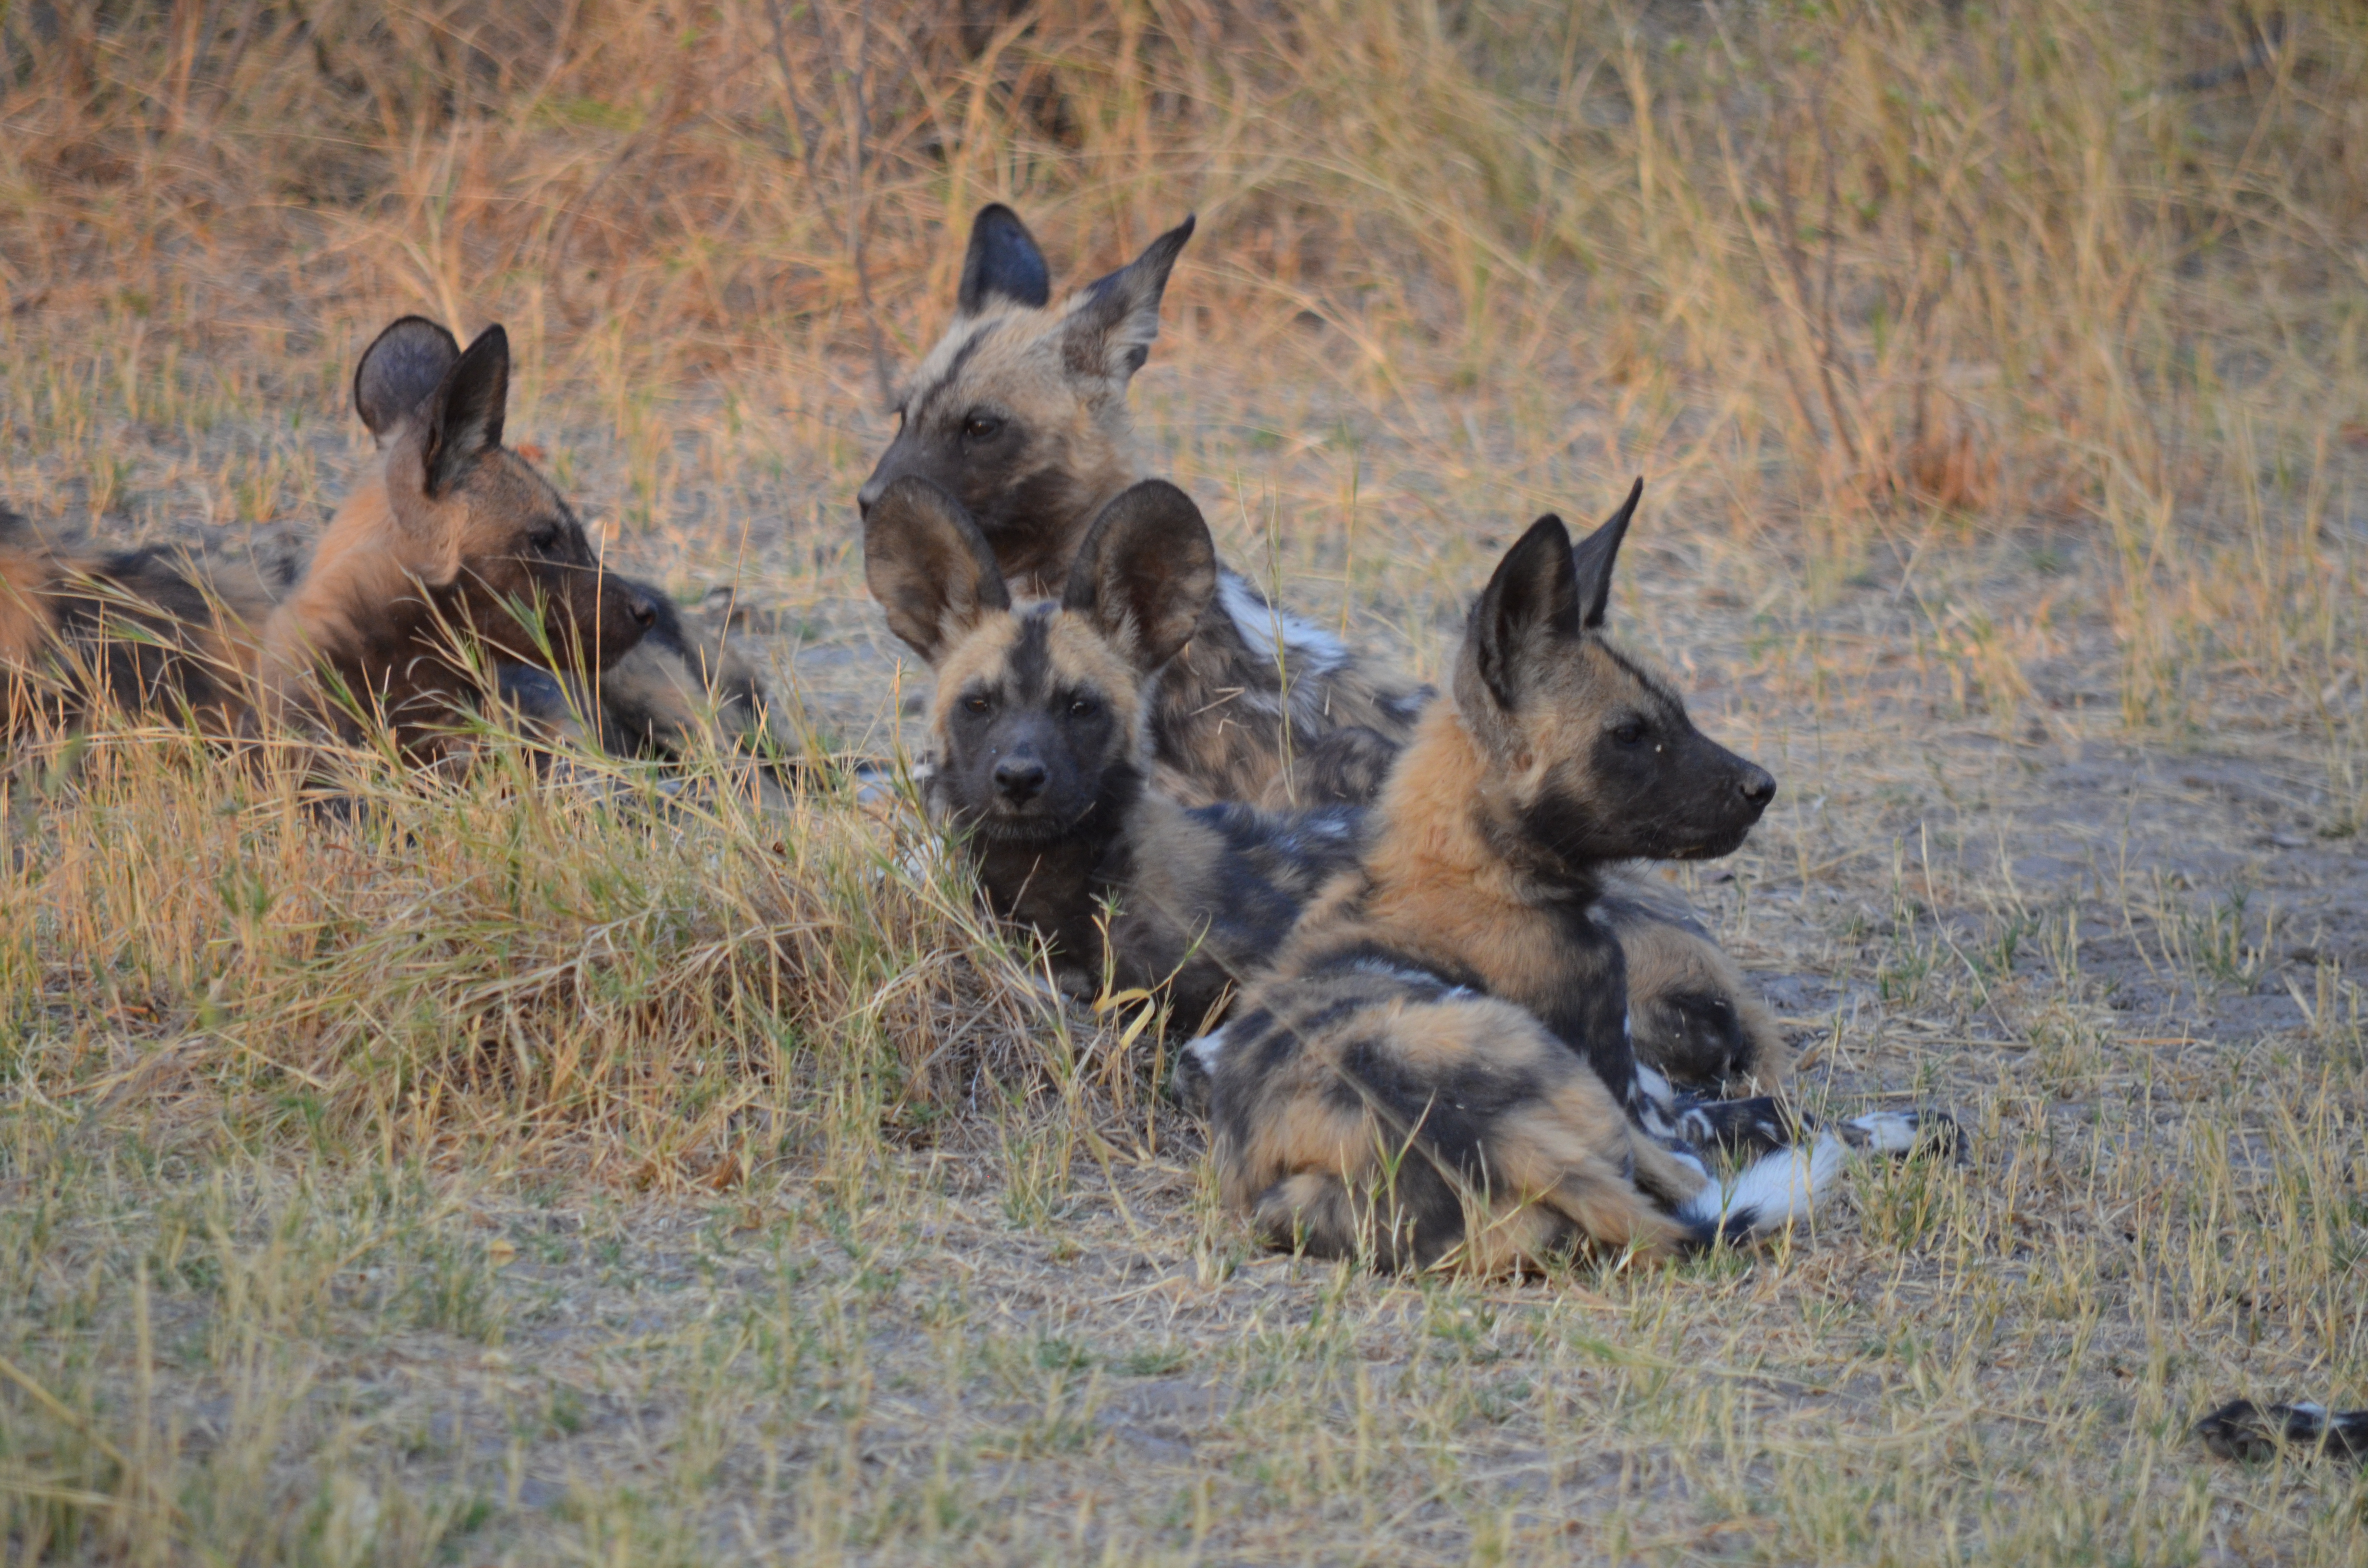 The Wild Dogs of Khwai